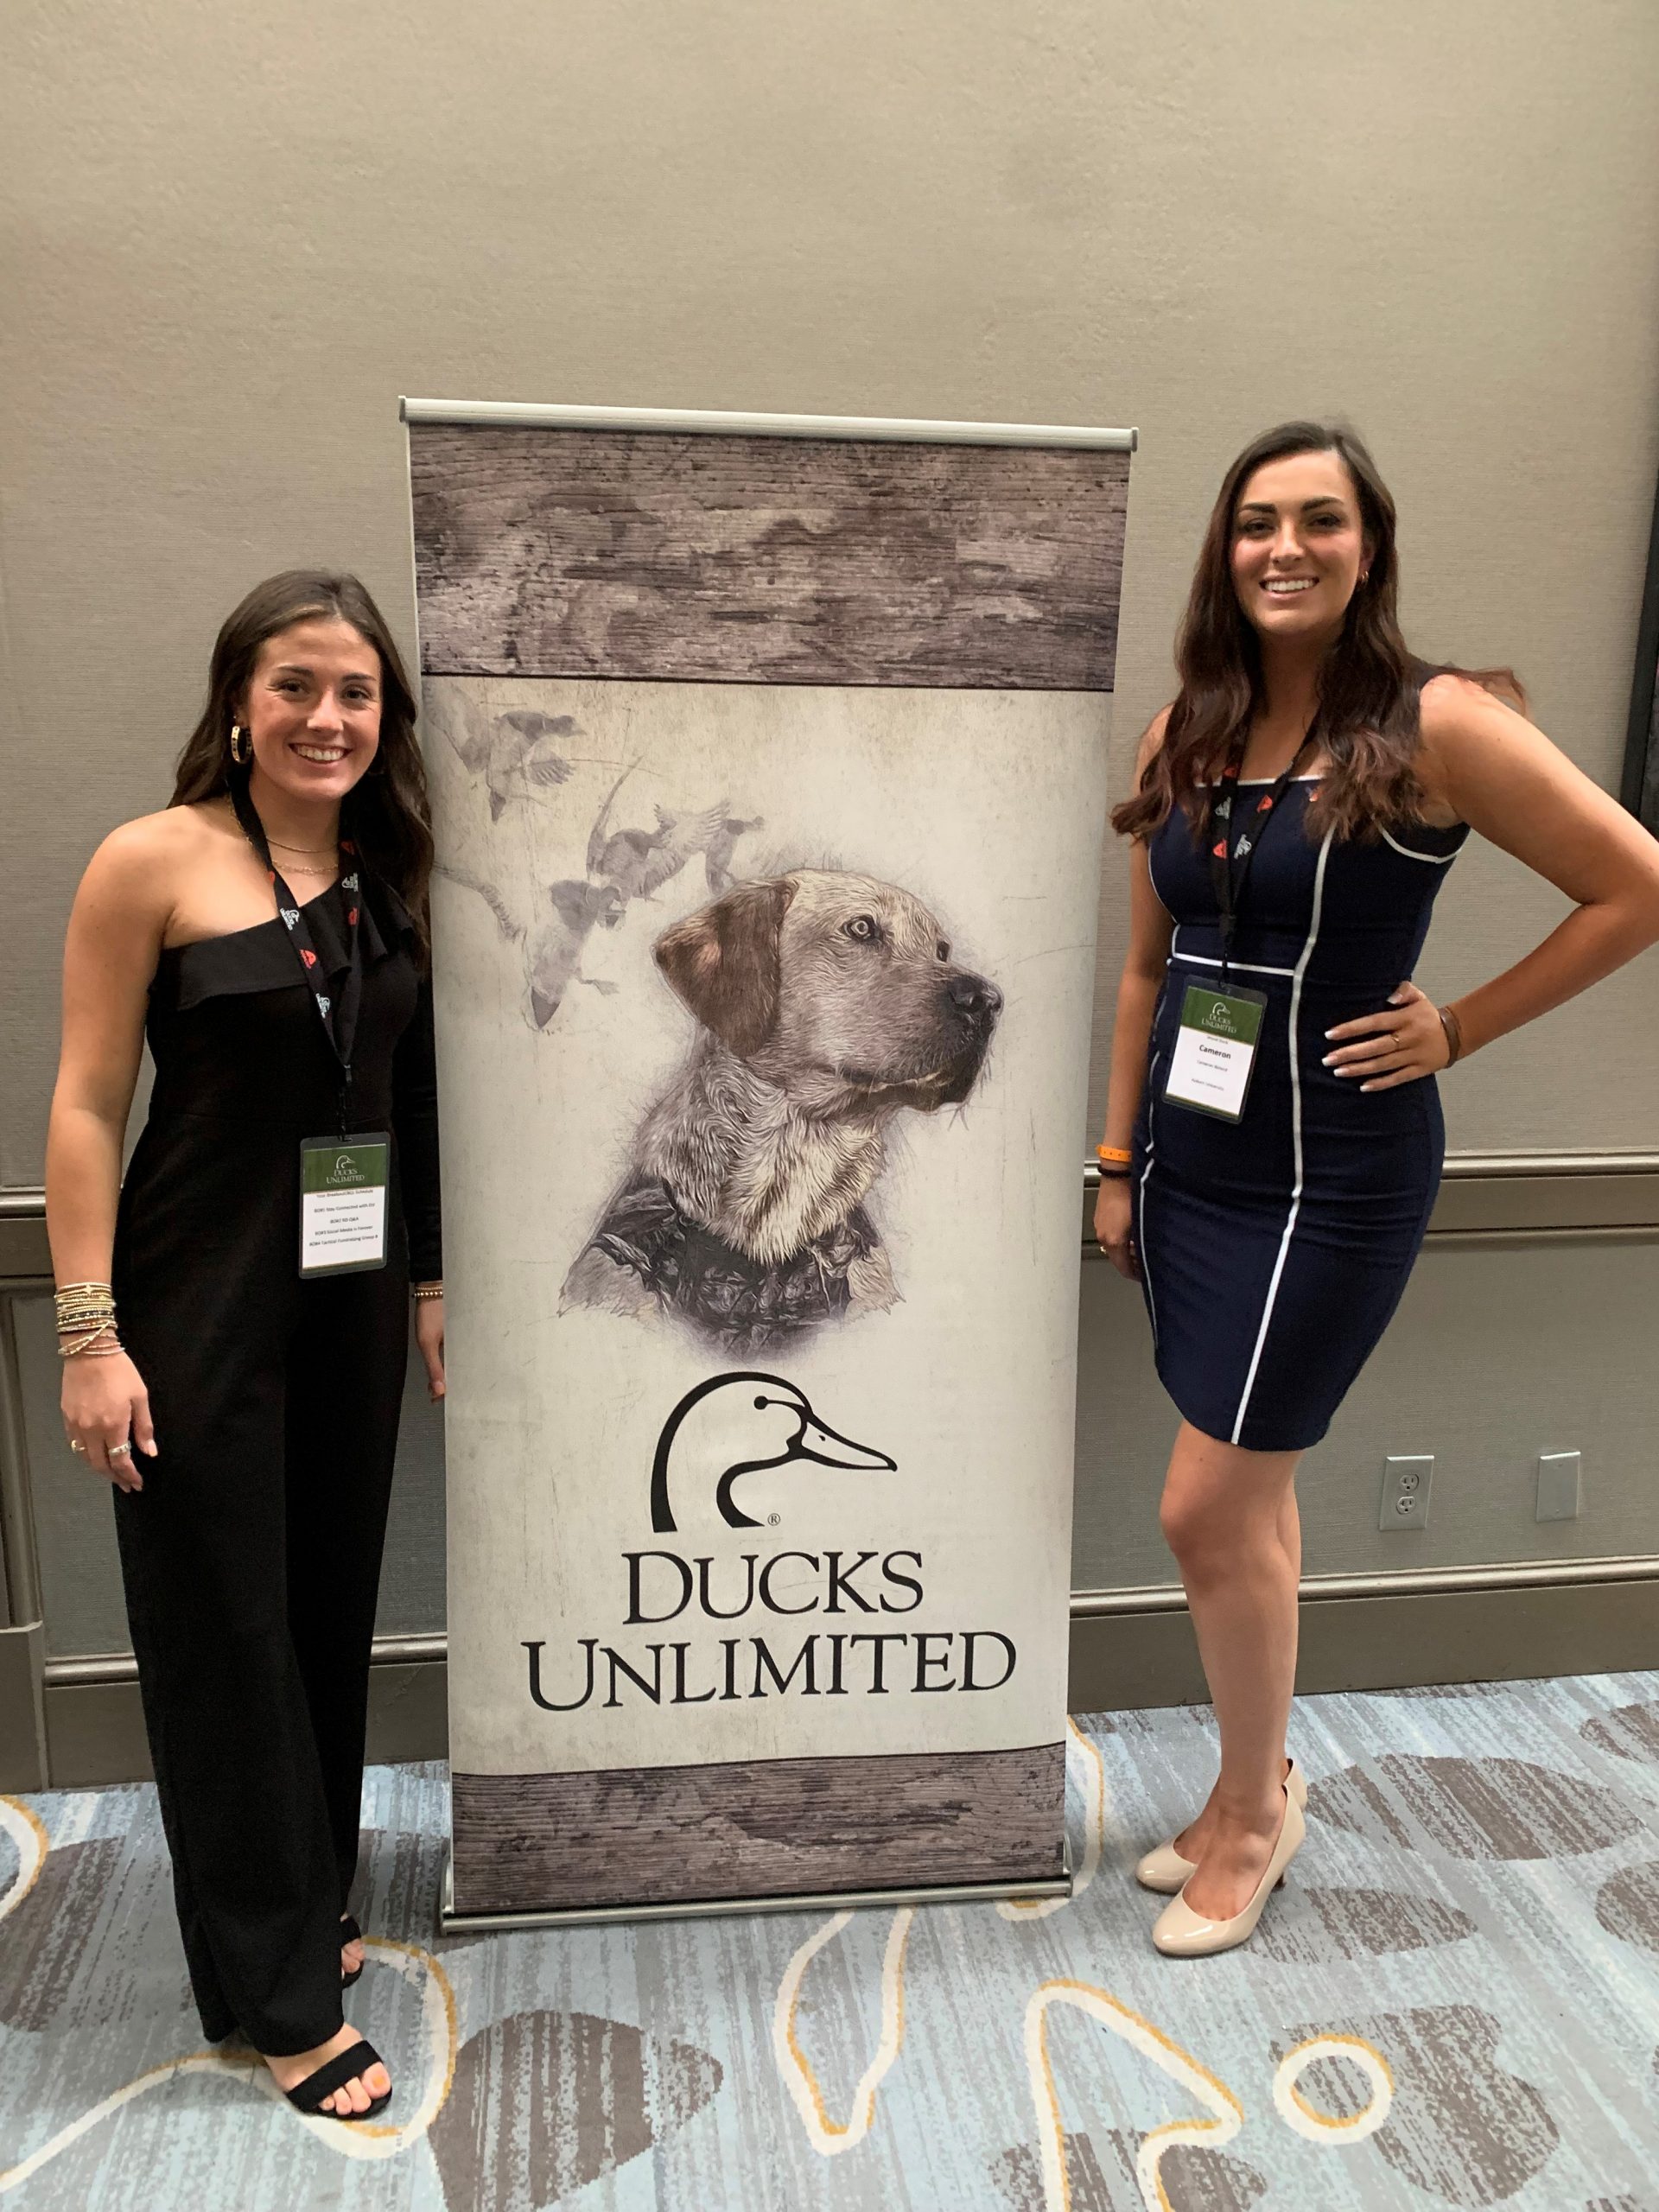 Medlin and Boland dressed in business casual stand on each side of a Ducks Unlimited banner.